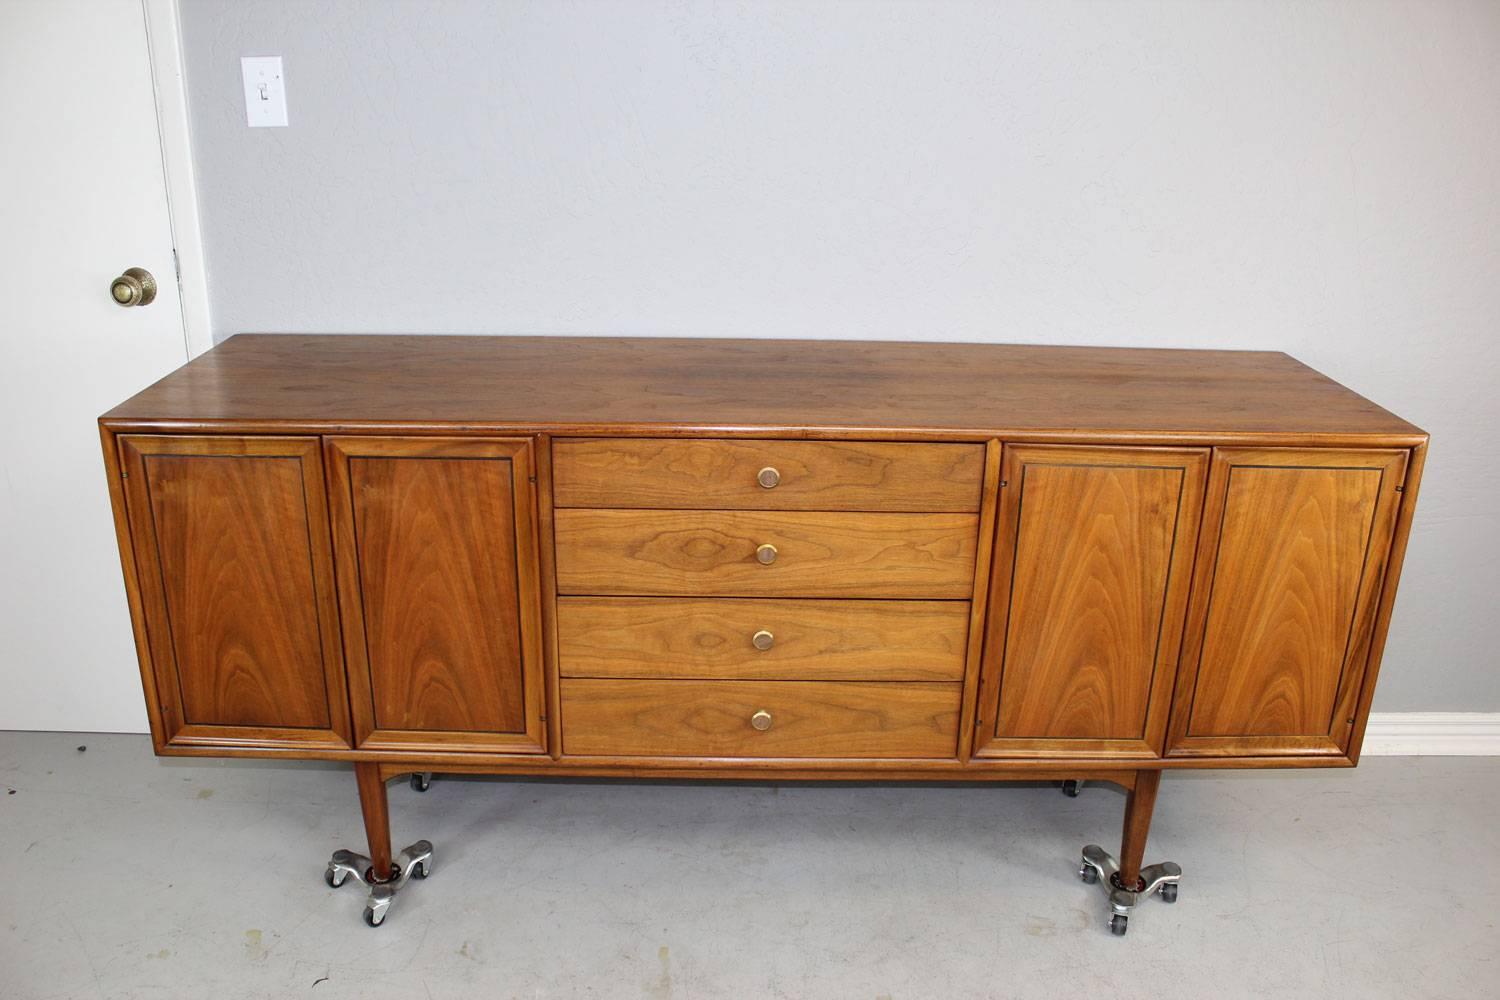 Unique Mid-Century Modern four-drawer credenza by Drexel in walnut with lighted interior cabinets. Professionally restured.